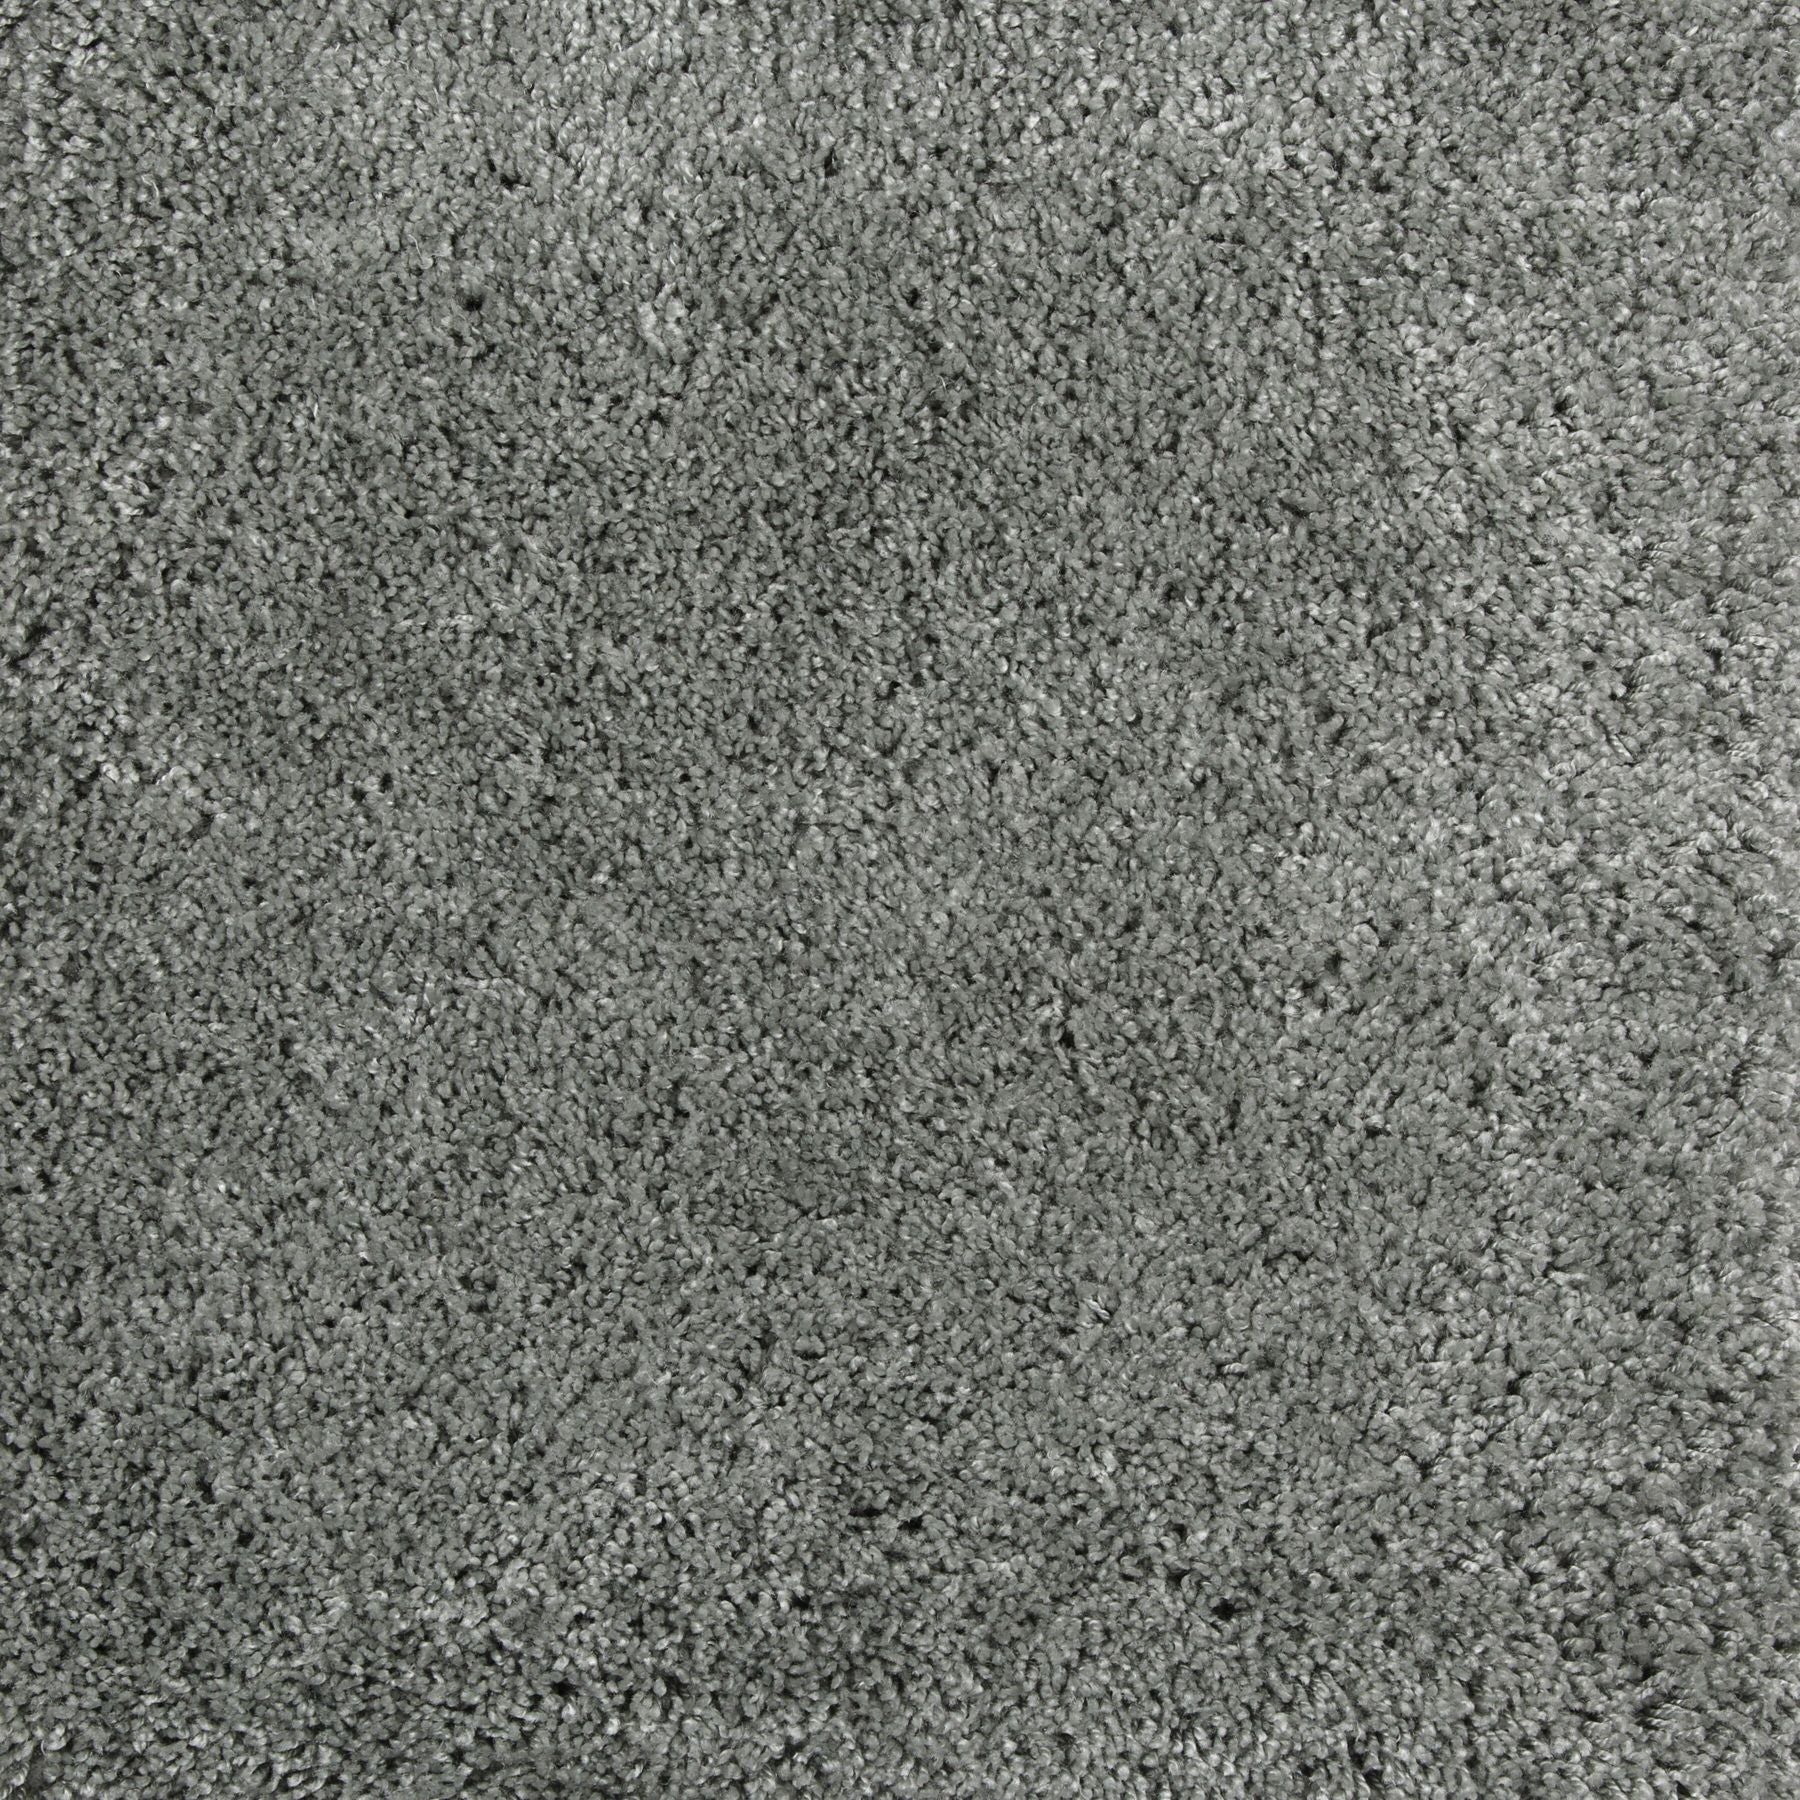 Synthetic broadloom carpet swatch in a cut pile texture in gray-green.